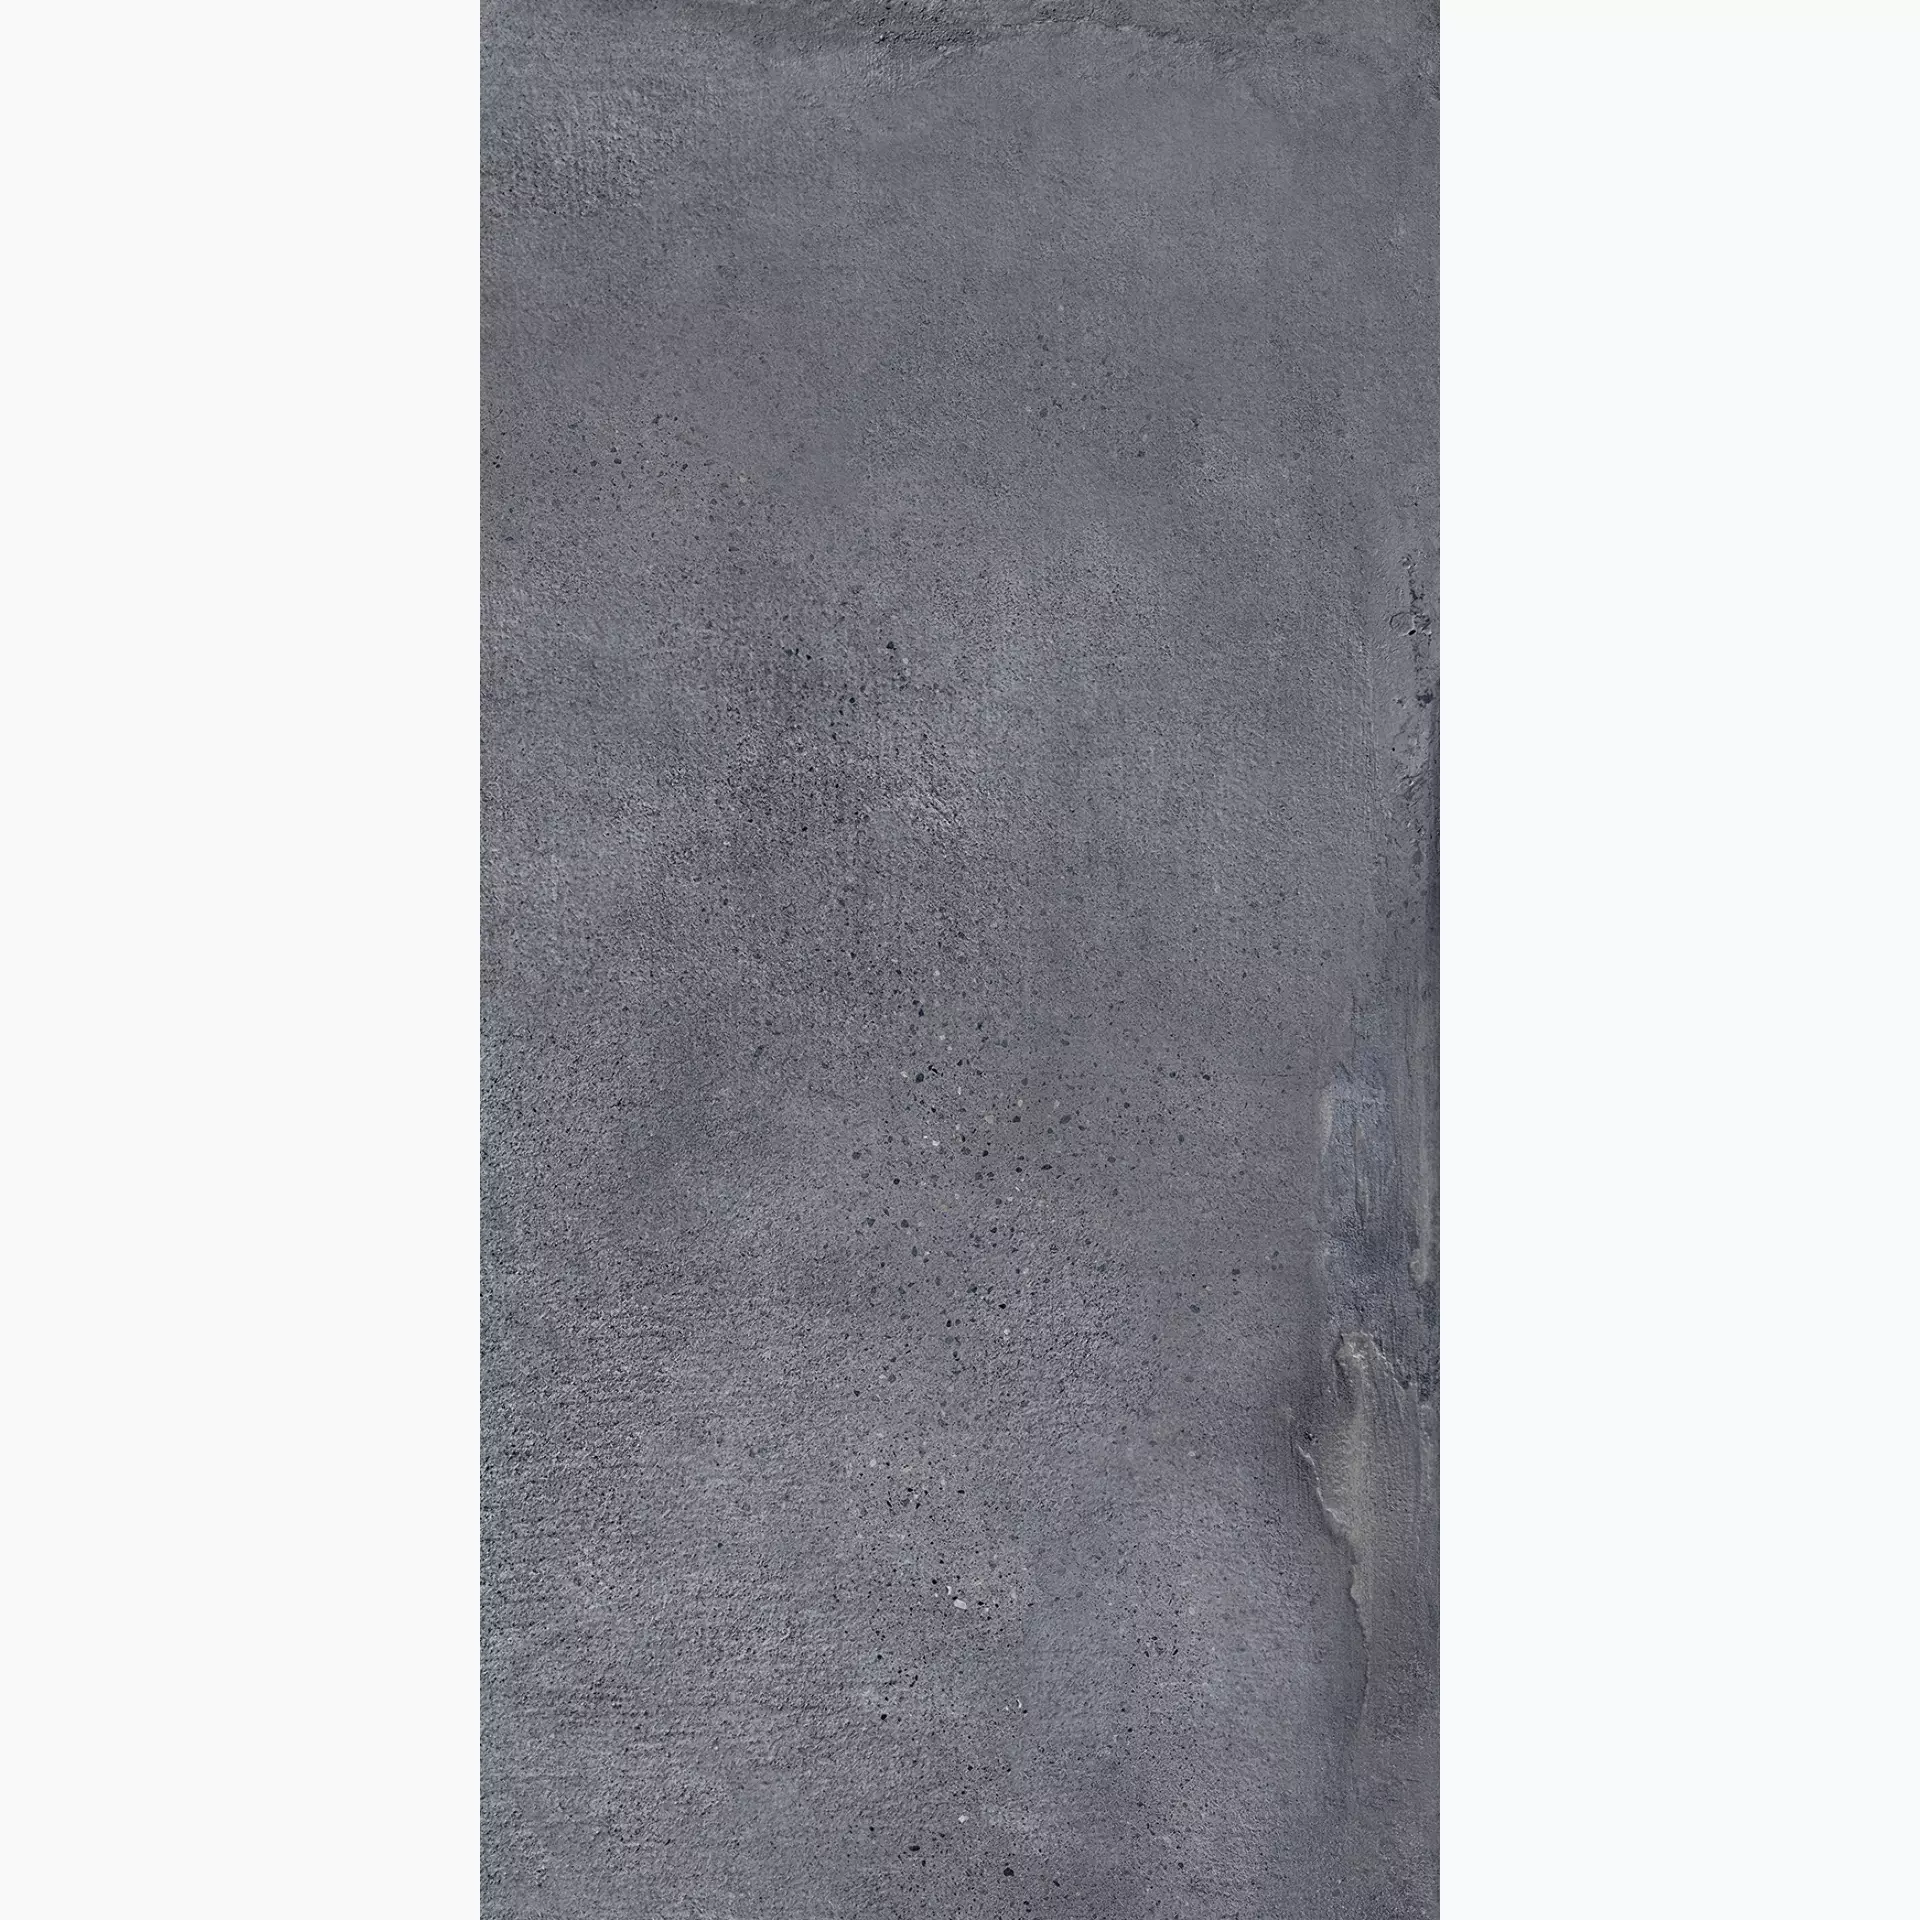 Keope Urban Anthracite Strutturato 44503349 30x60cm rectified 8,5mm